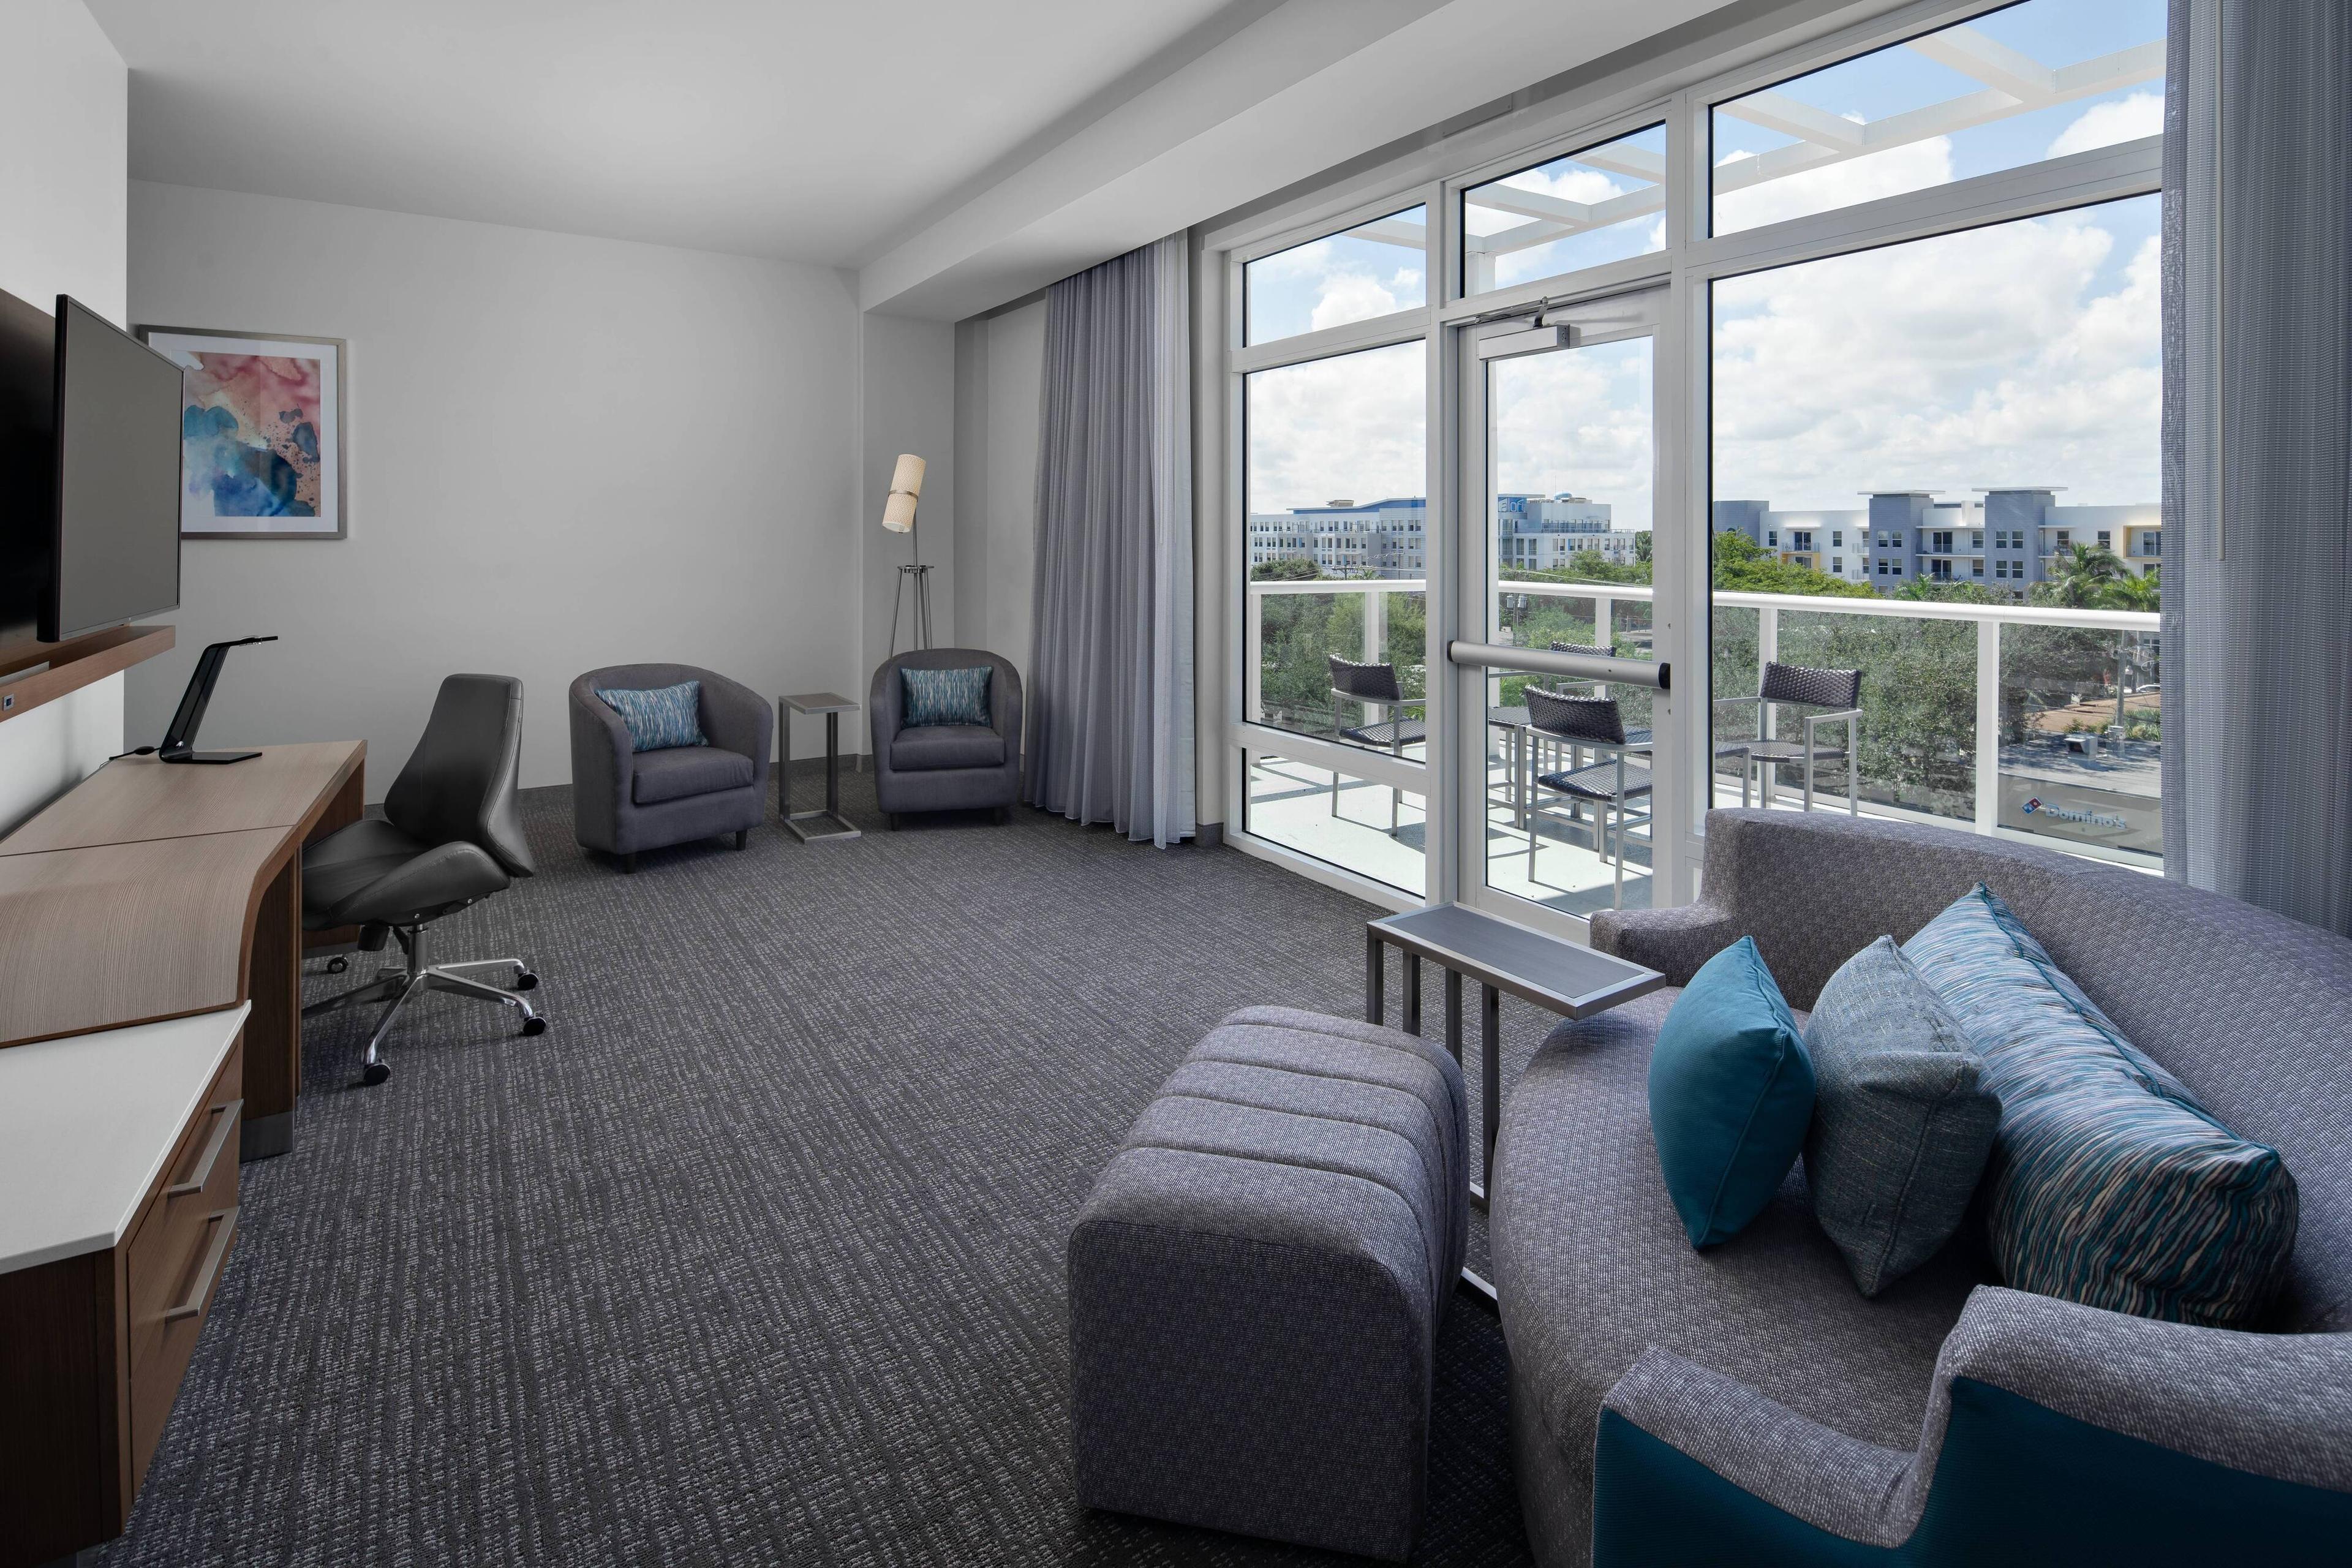 Step out onto your balcony for views of Delray Beach from our living room area, equipped with work desk area, television, small refrigerator, sofa bed and complimentary Wi-Fi.